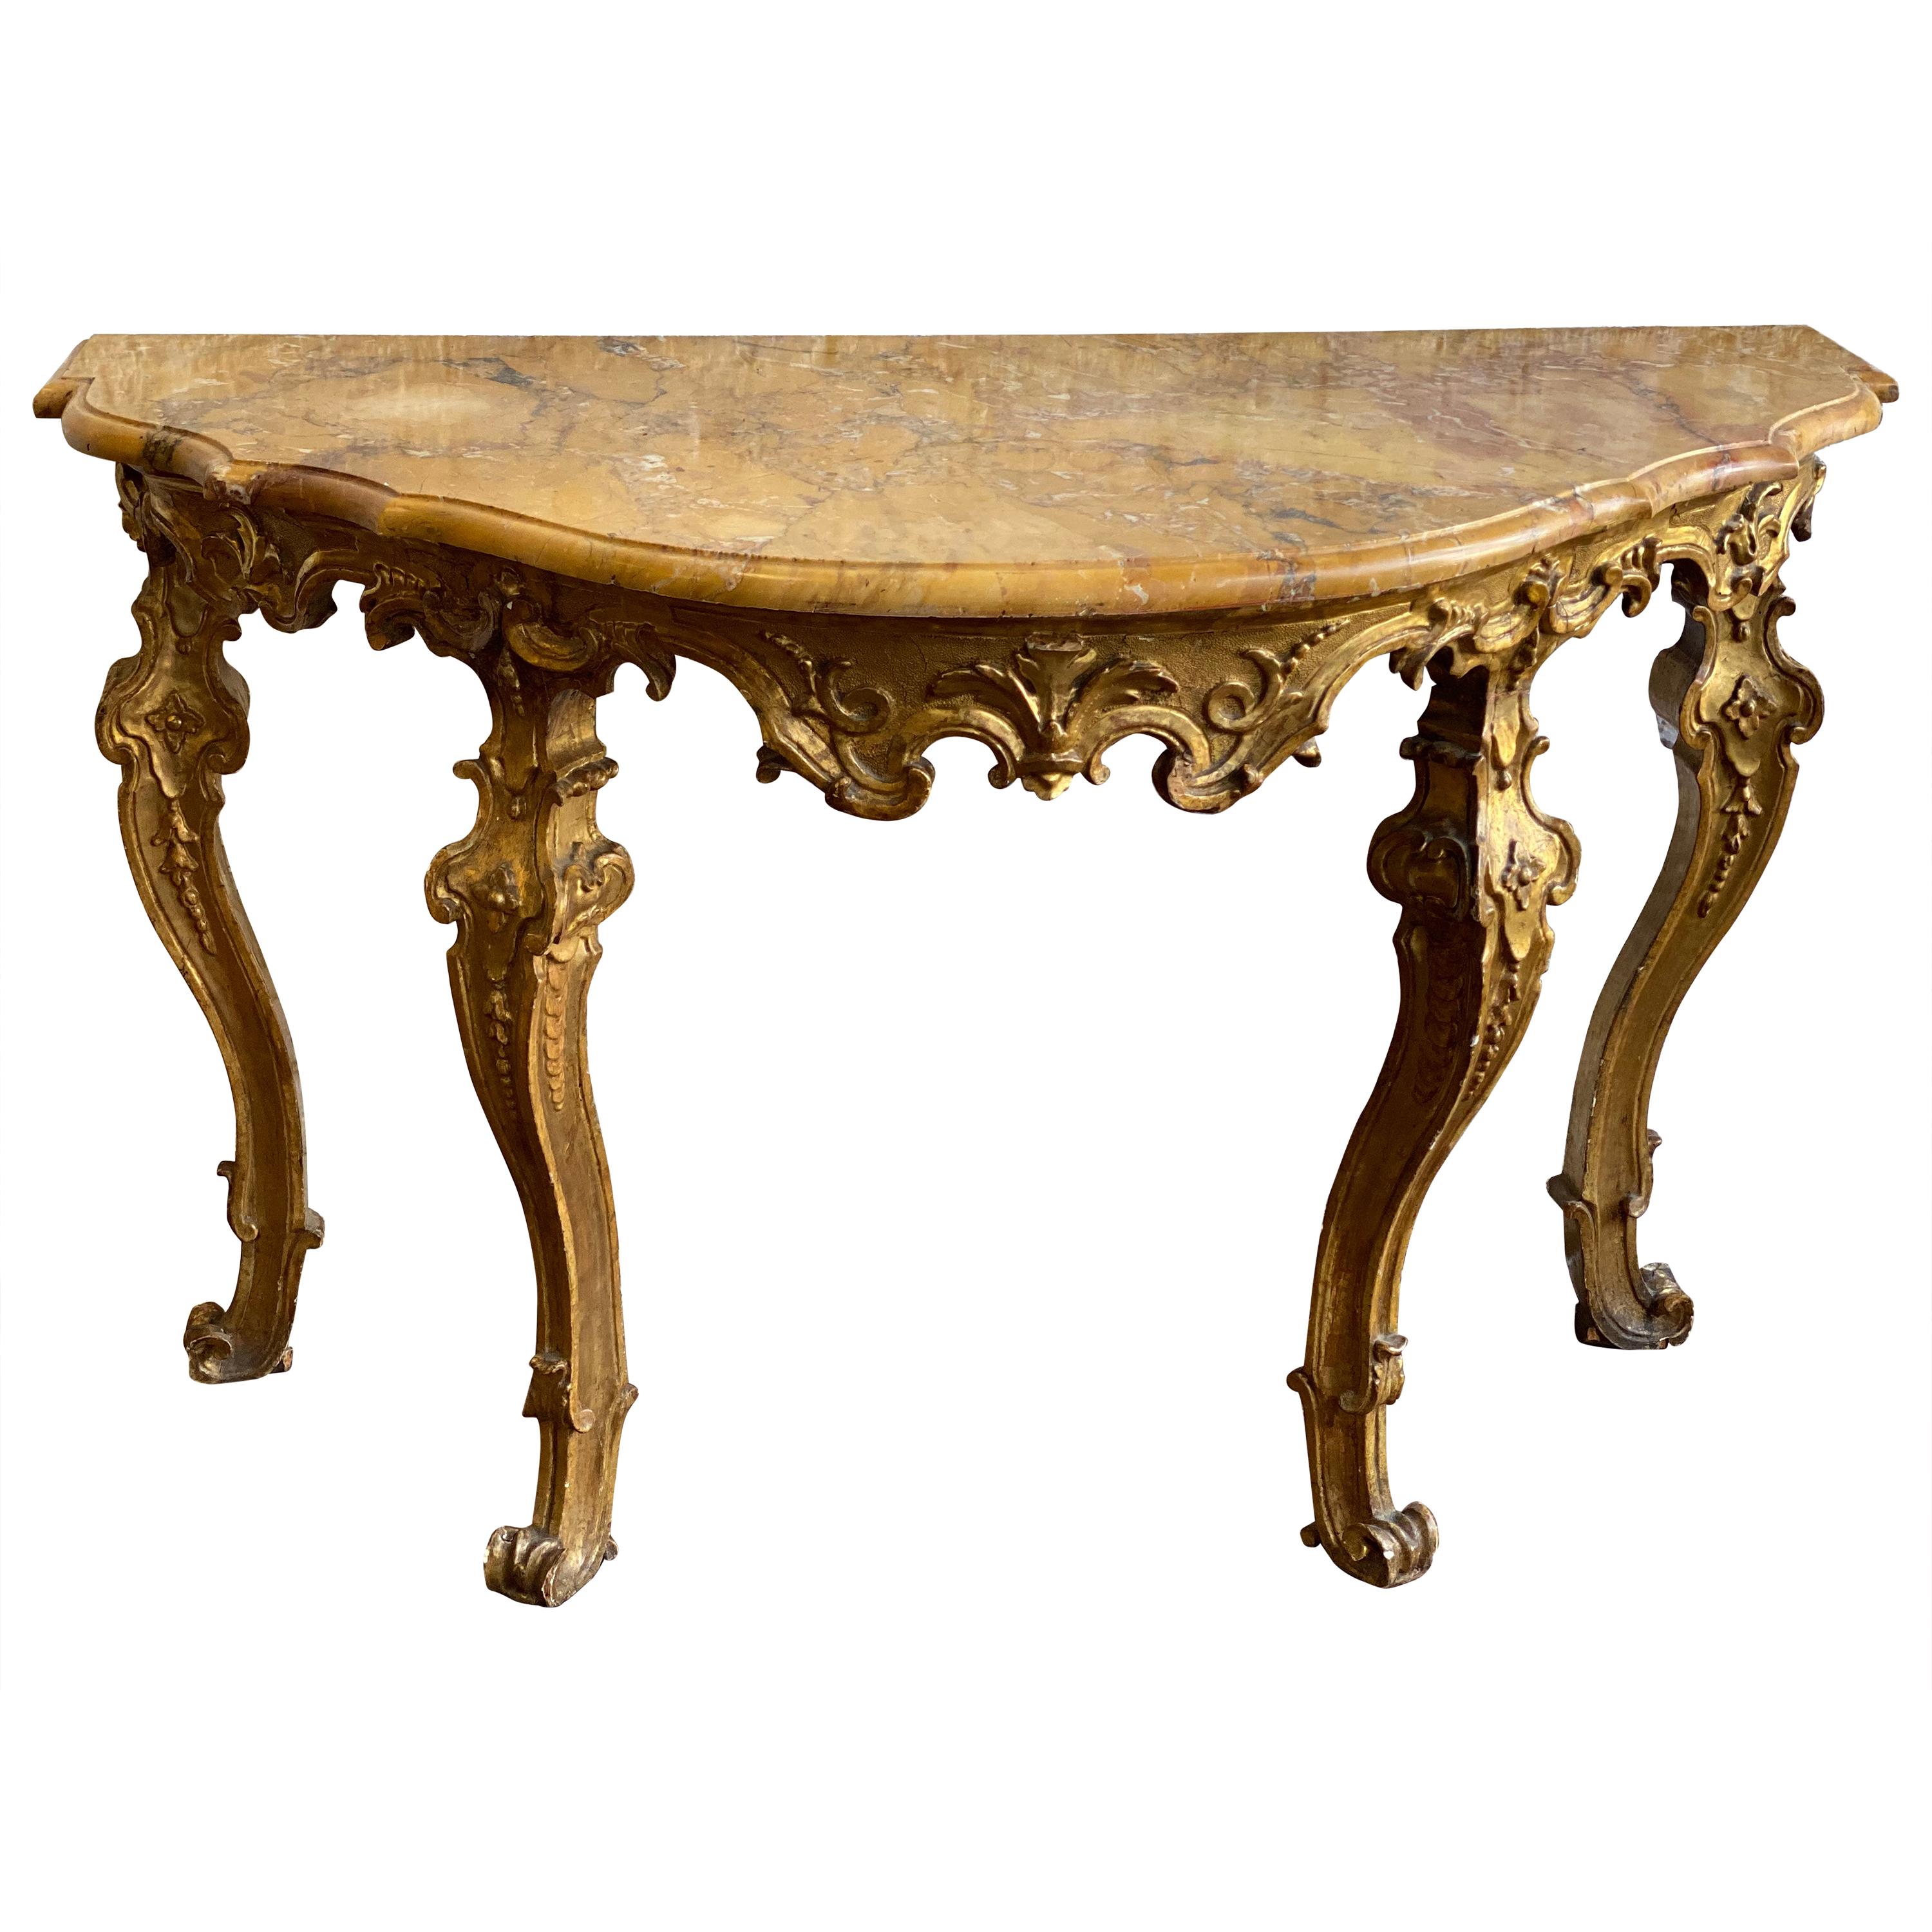 Early 18th Century Italian Rococo Giltwood Console with Siena Marble Top For Sale